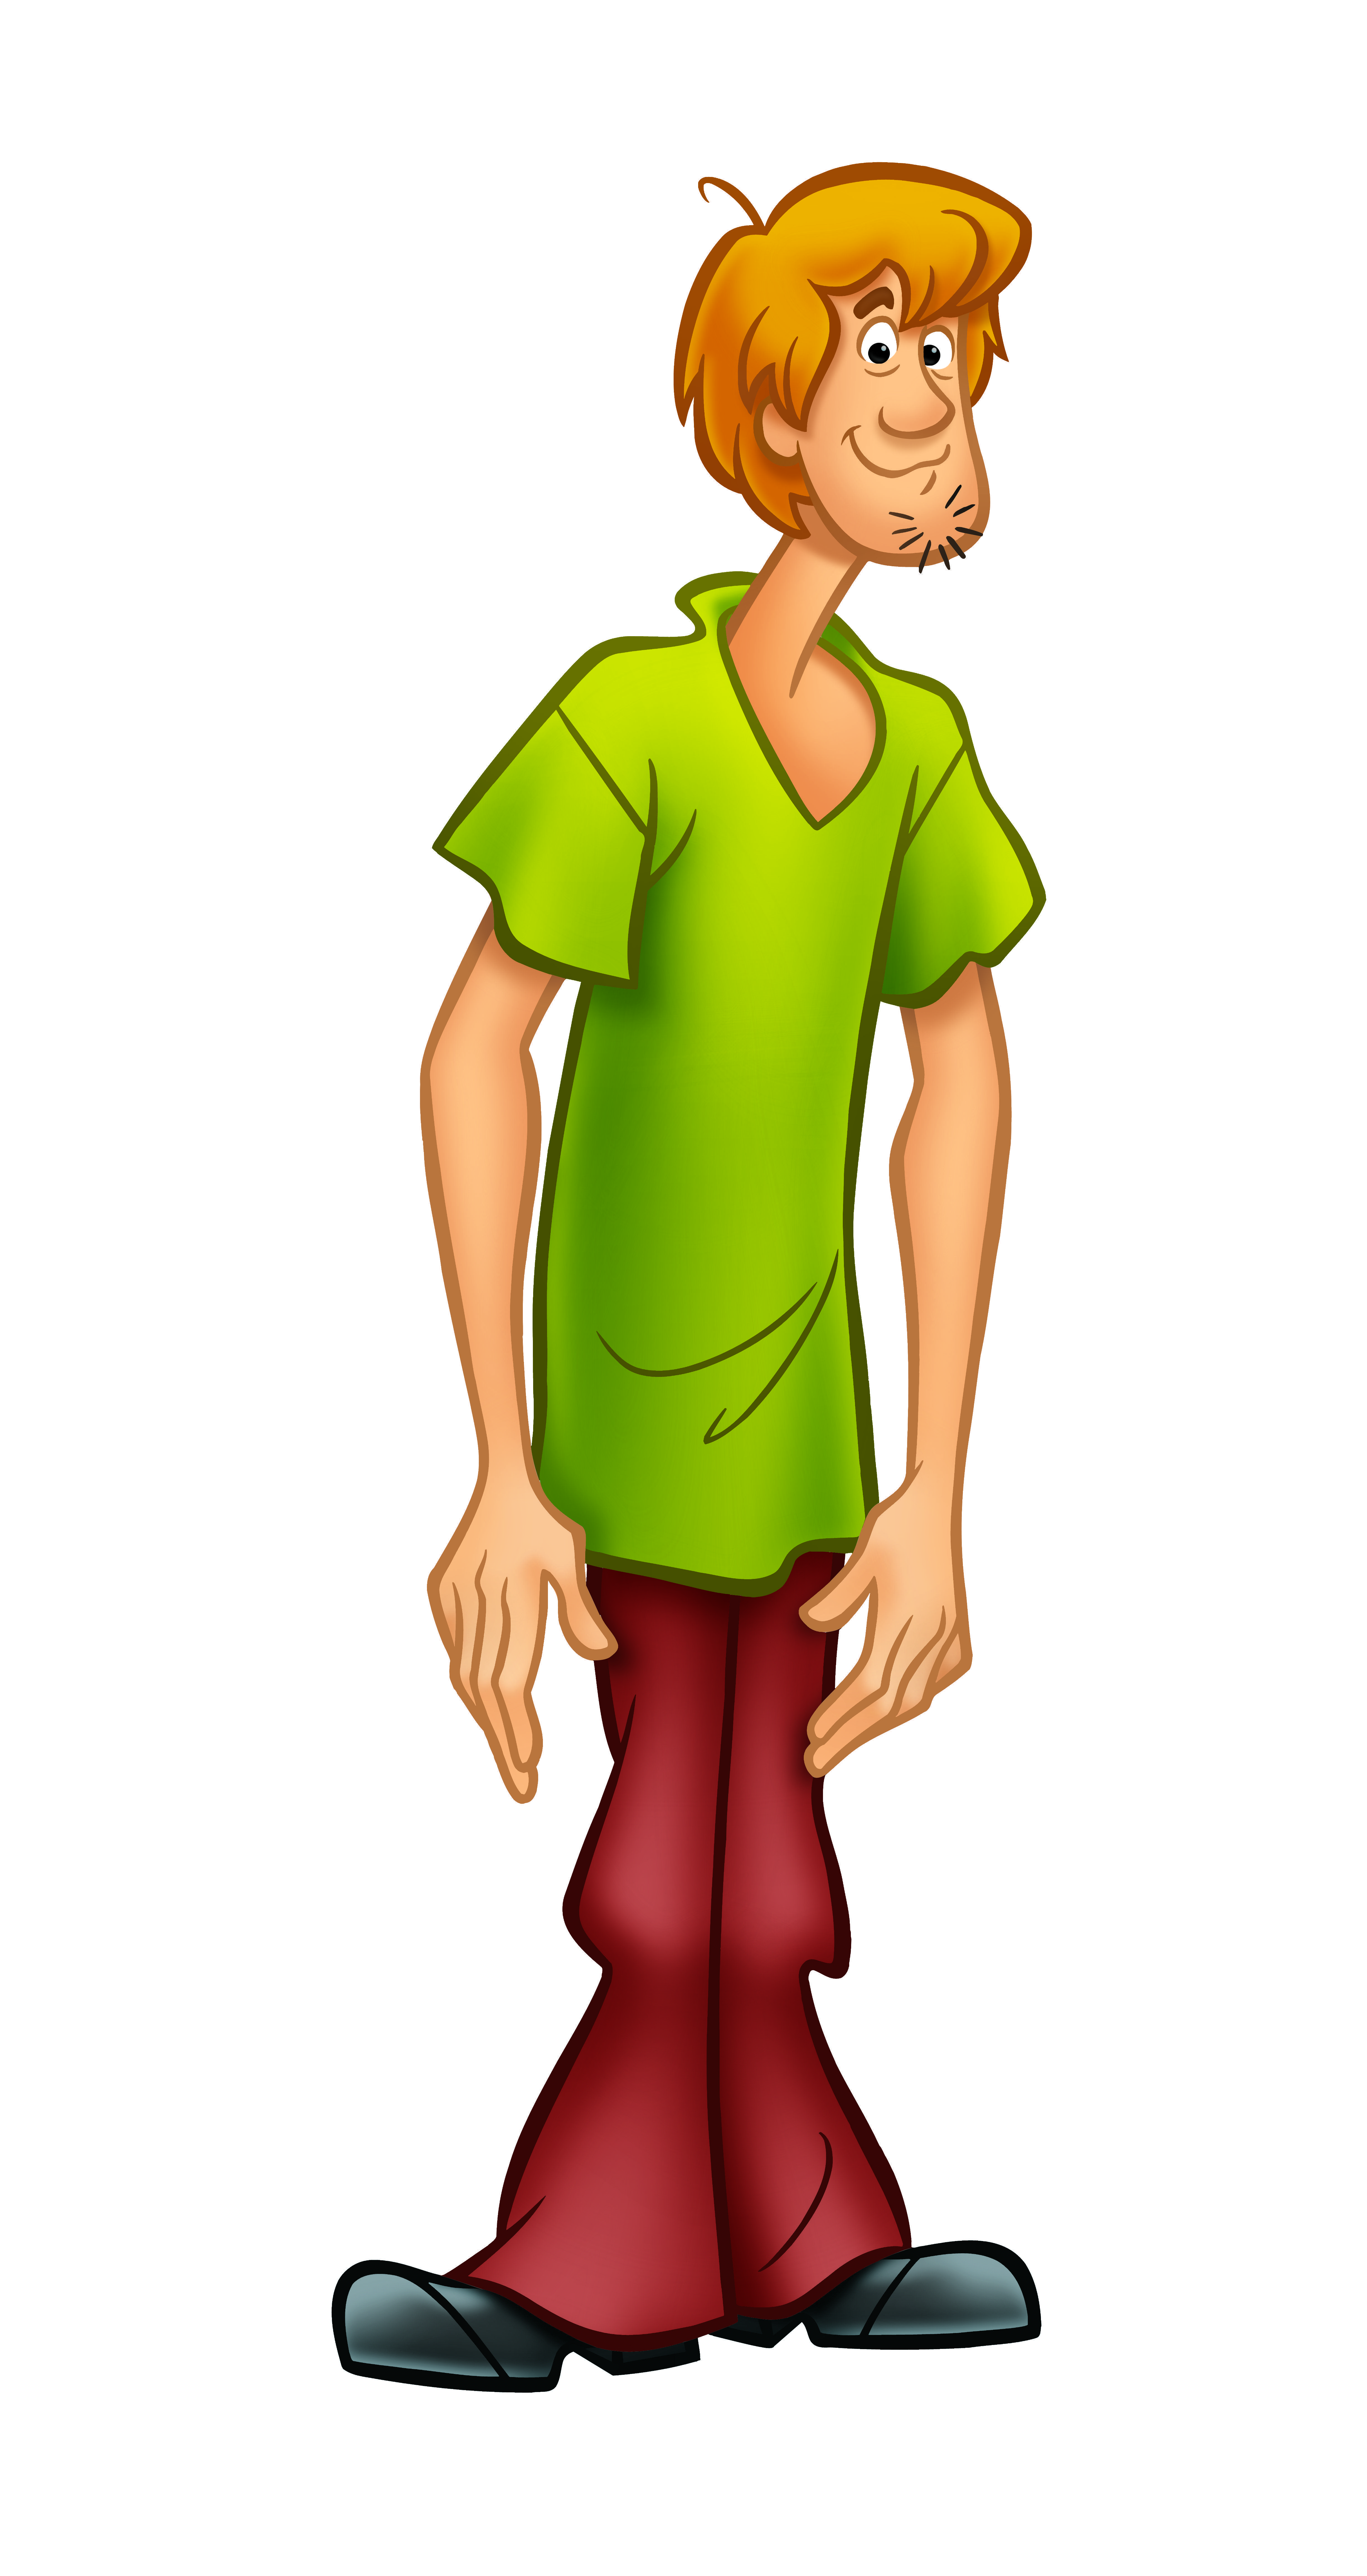 Shaggy Rogers Wallpaper Free Shaggy Rogers Background